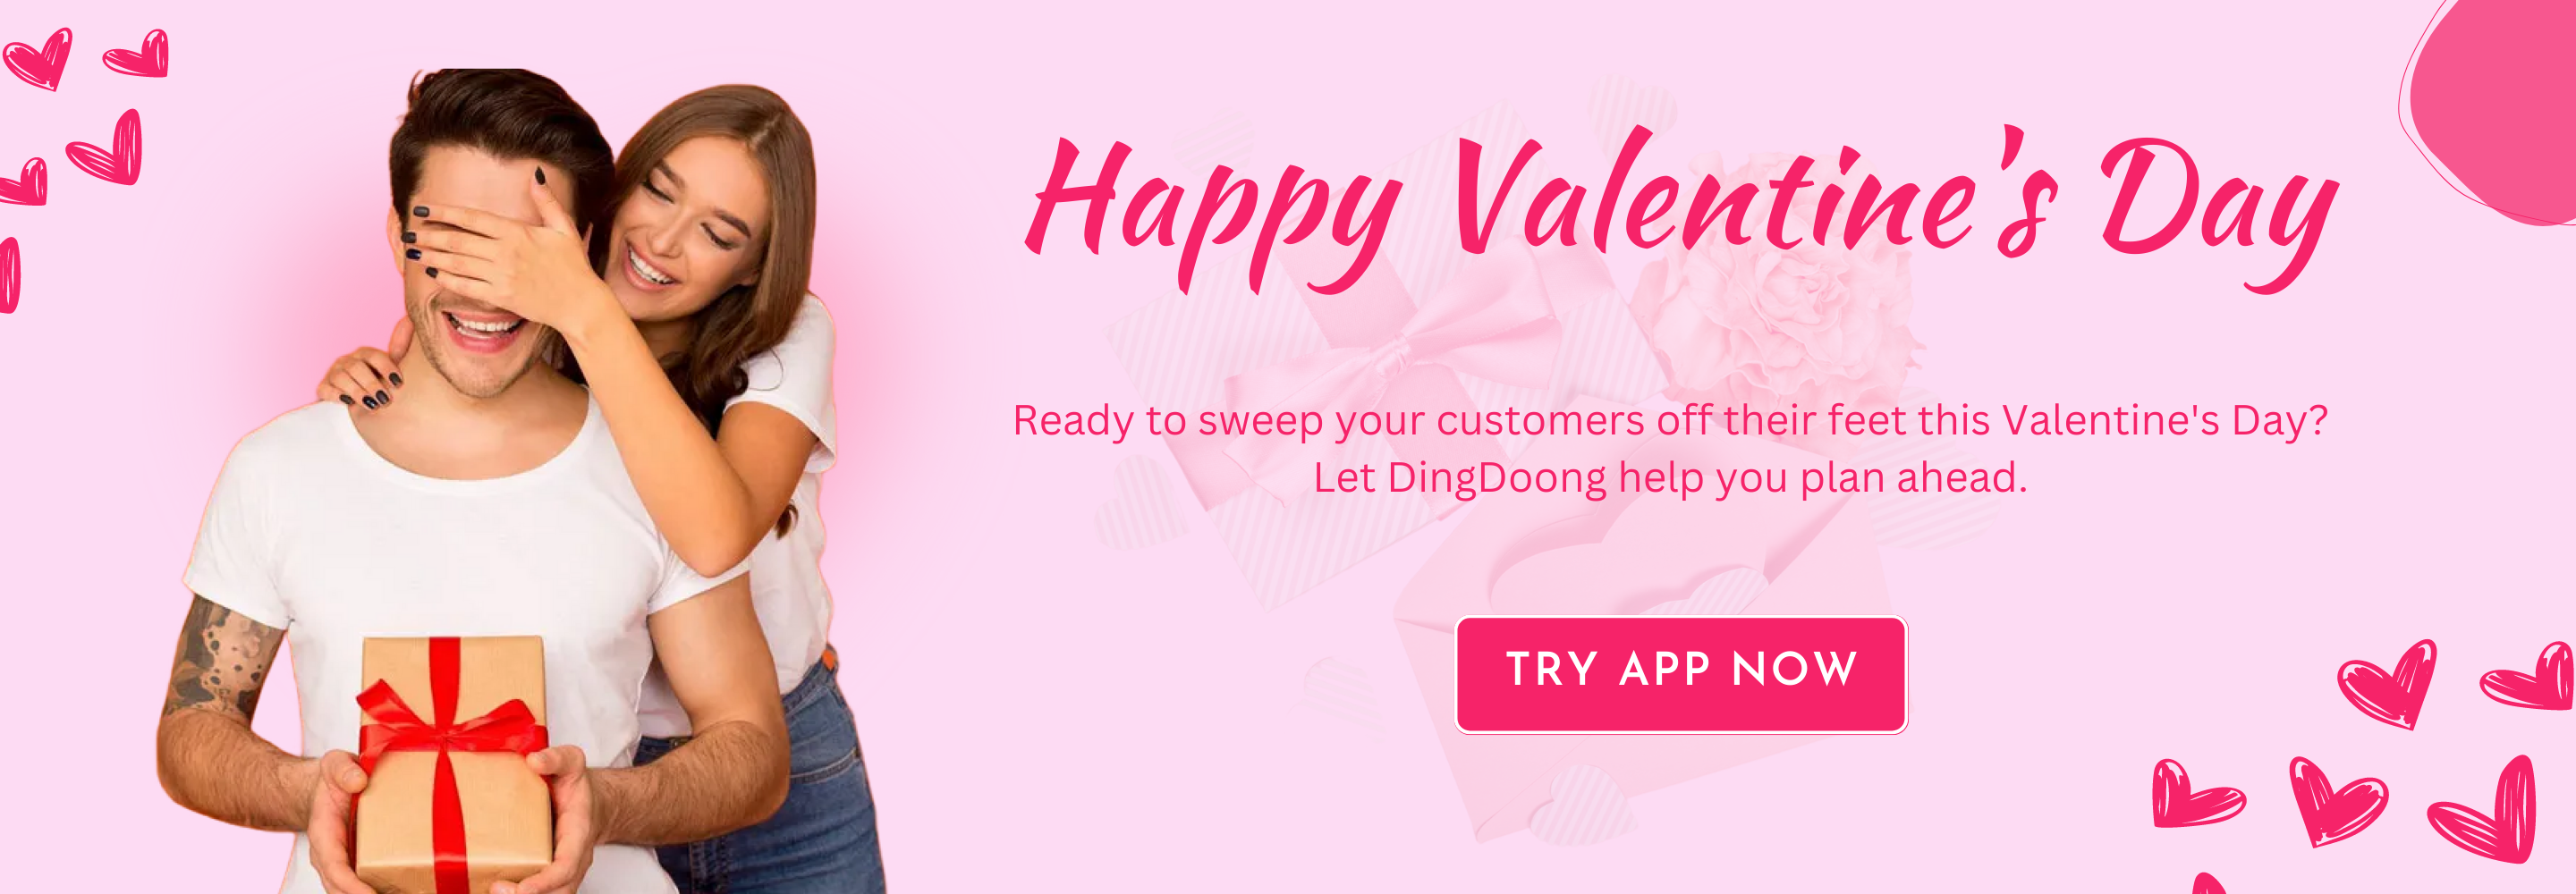 https://apps.shopify.com/delivery-date-omega?surface_detail=DD_bannertop_valentine